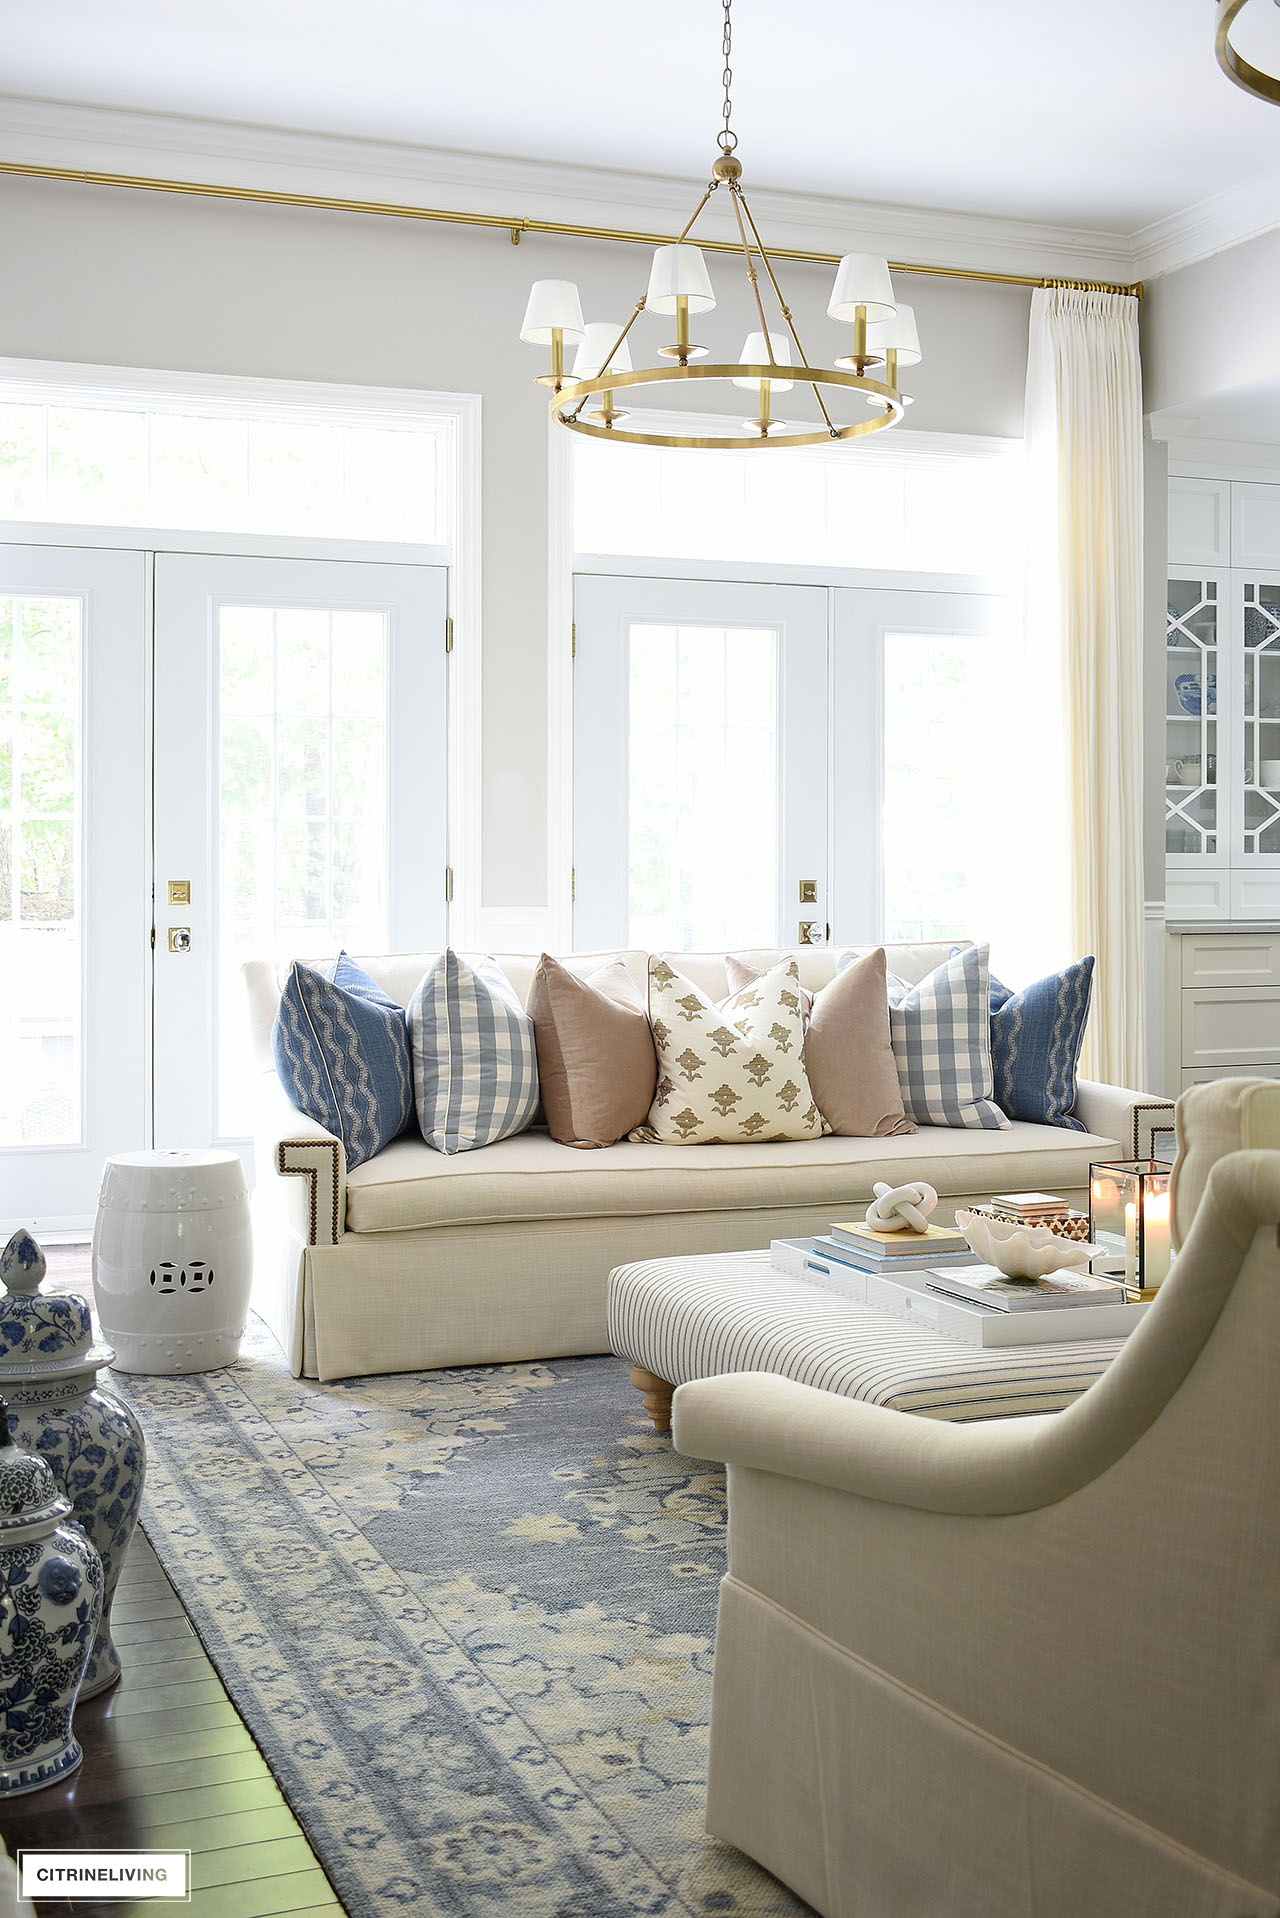 Ivory skirted sofa styled with luxe pillows in blue, tan and ivory in front of double french doors